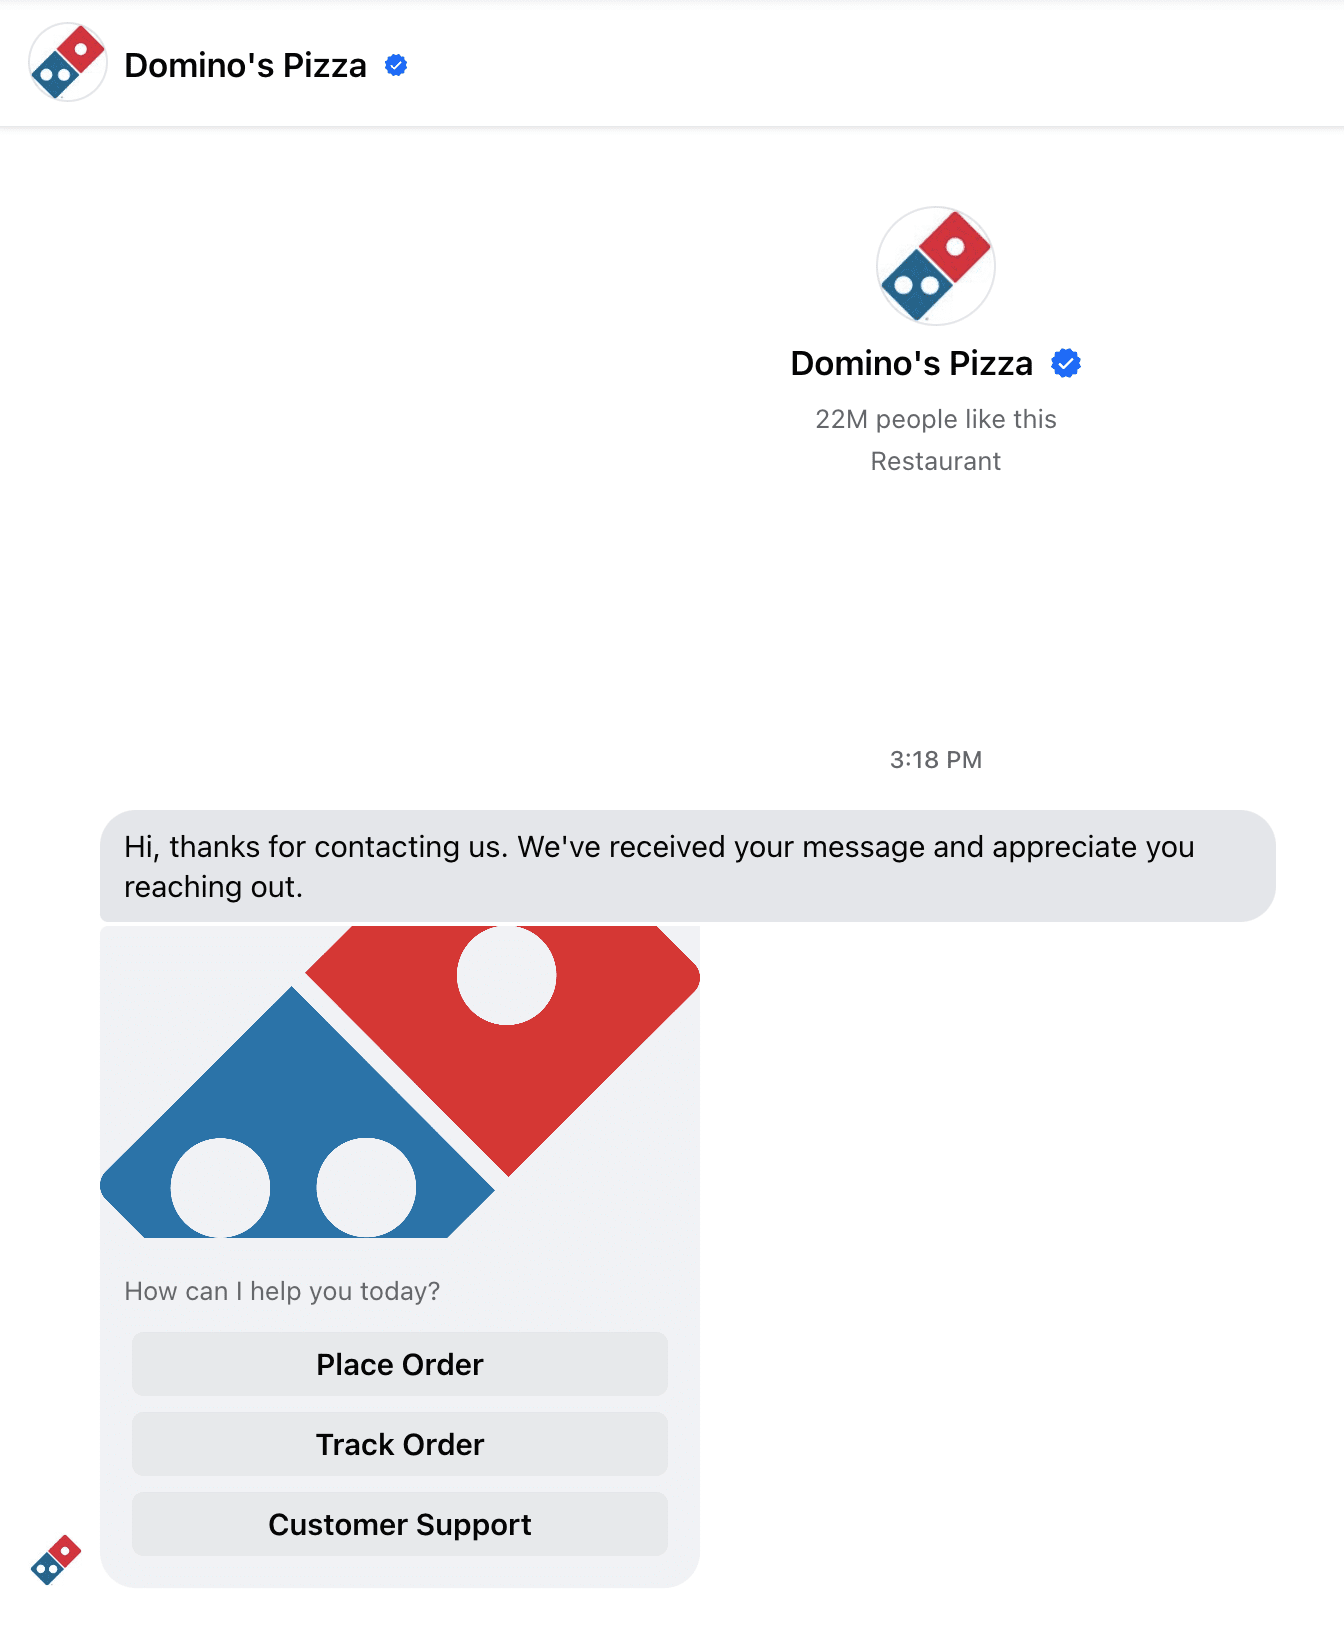 Domino’s has a menu-based chatbot on Facebook Messenger that helps customers place orders.